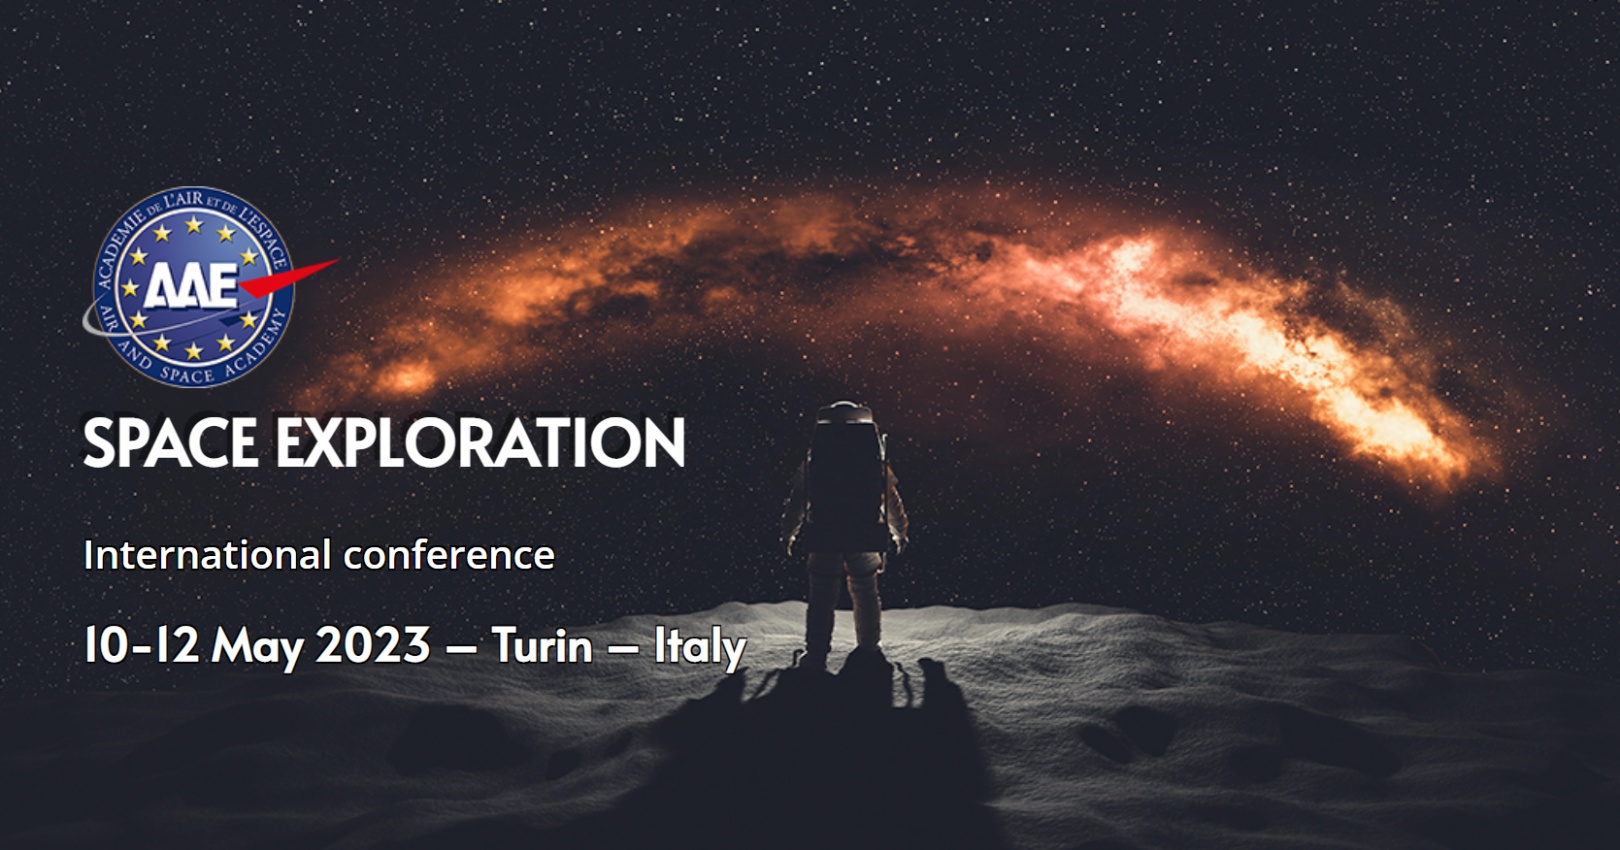 AAE International Conference on Space Exploration ESA BIC Turin